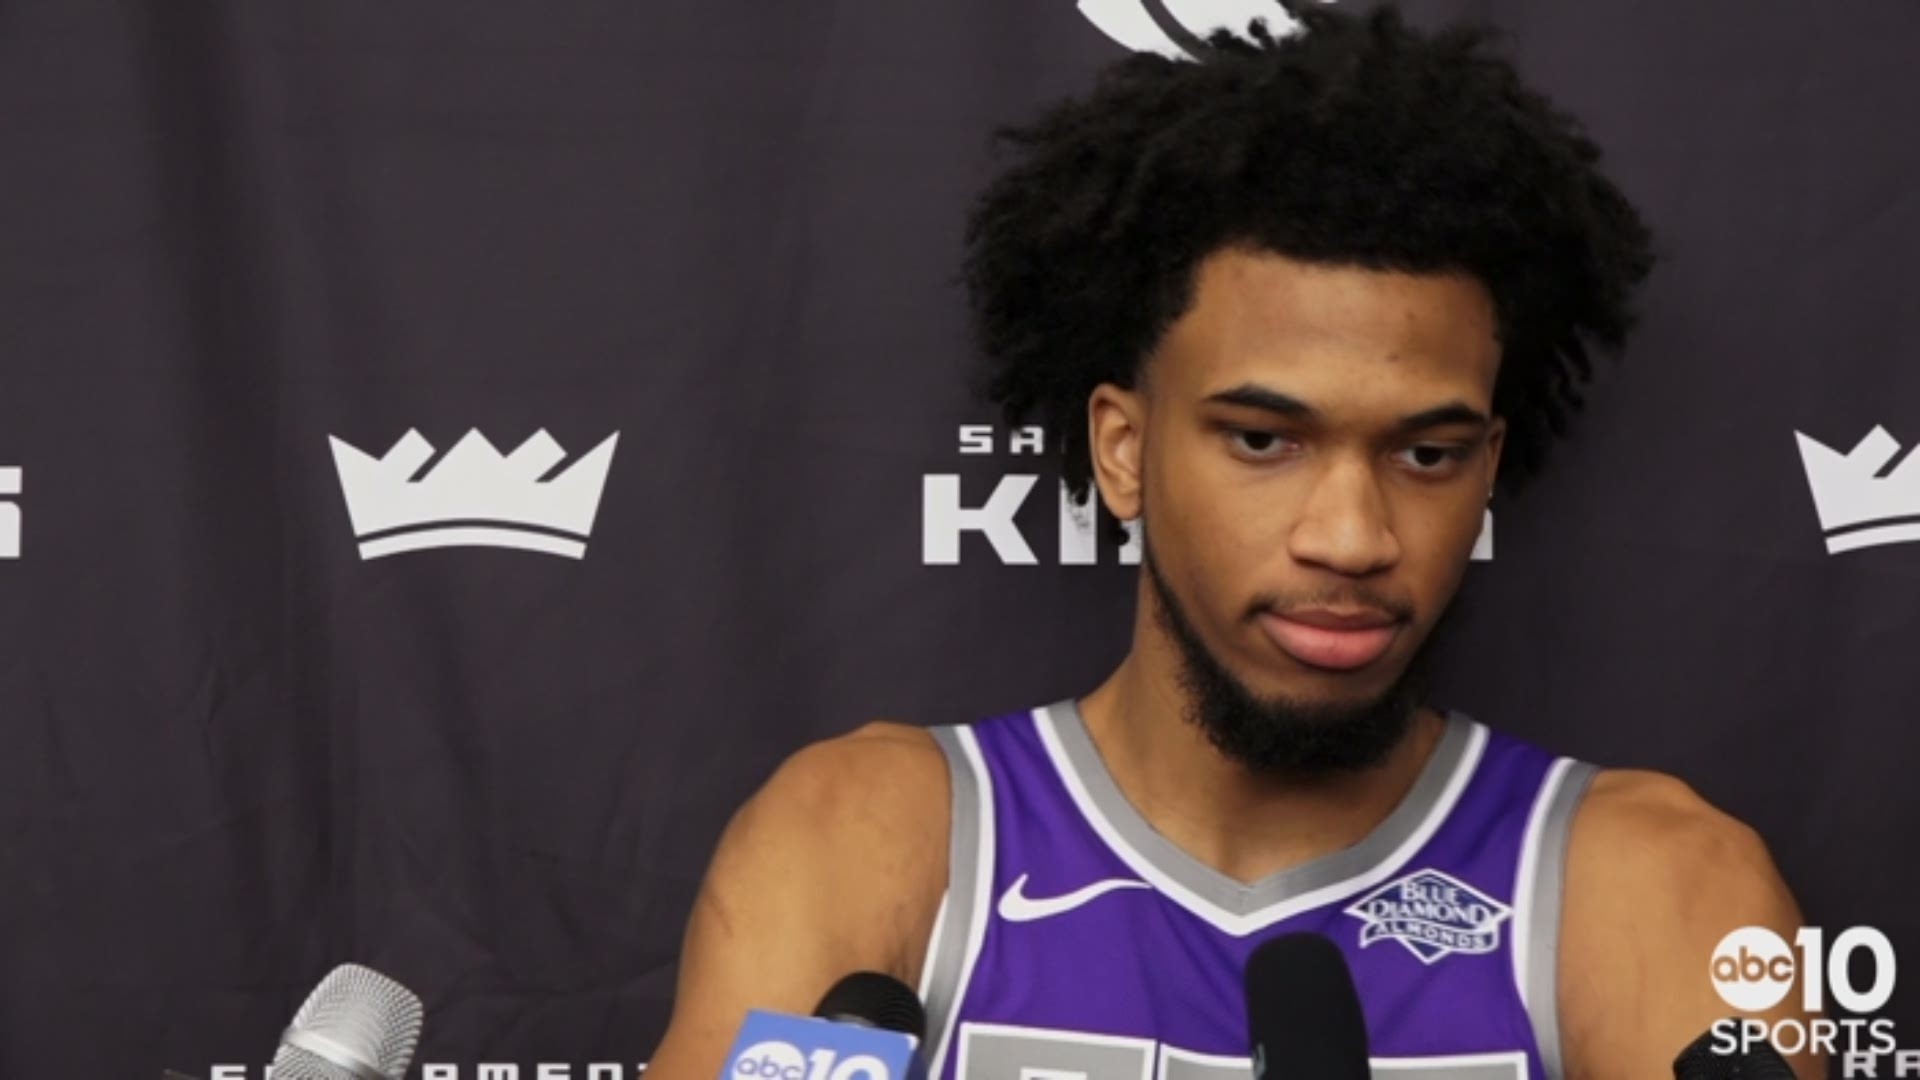 Kings rookie forward Marvin Bagley III chats about his offseason following Summer League, having his family settle into Sacramento and looking forward to making his NBA debut.